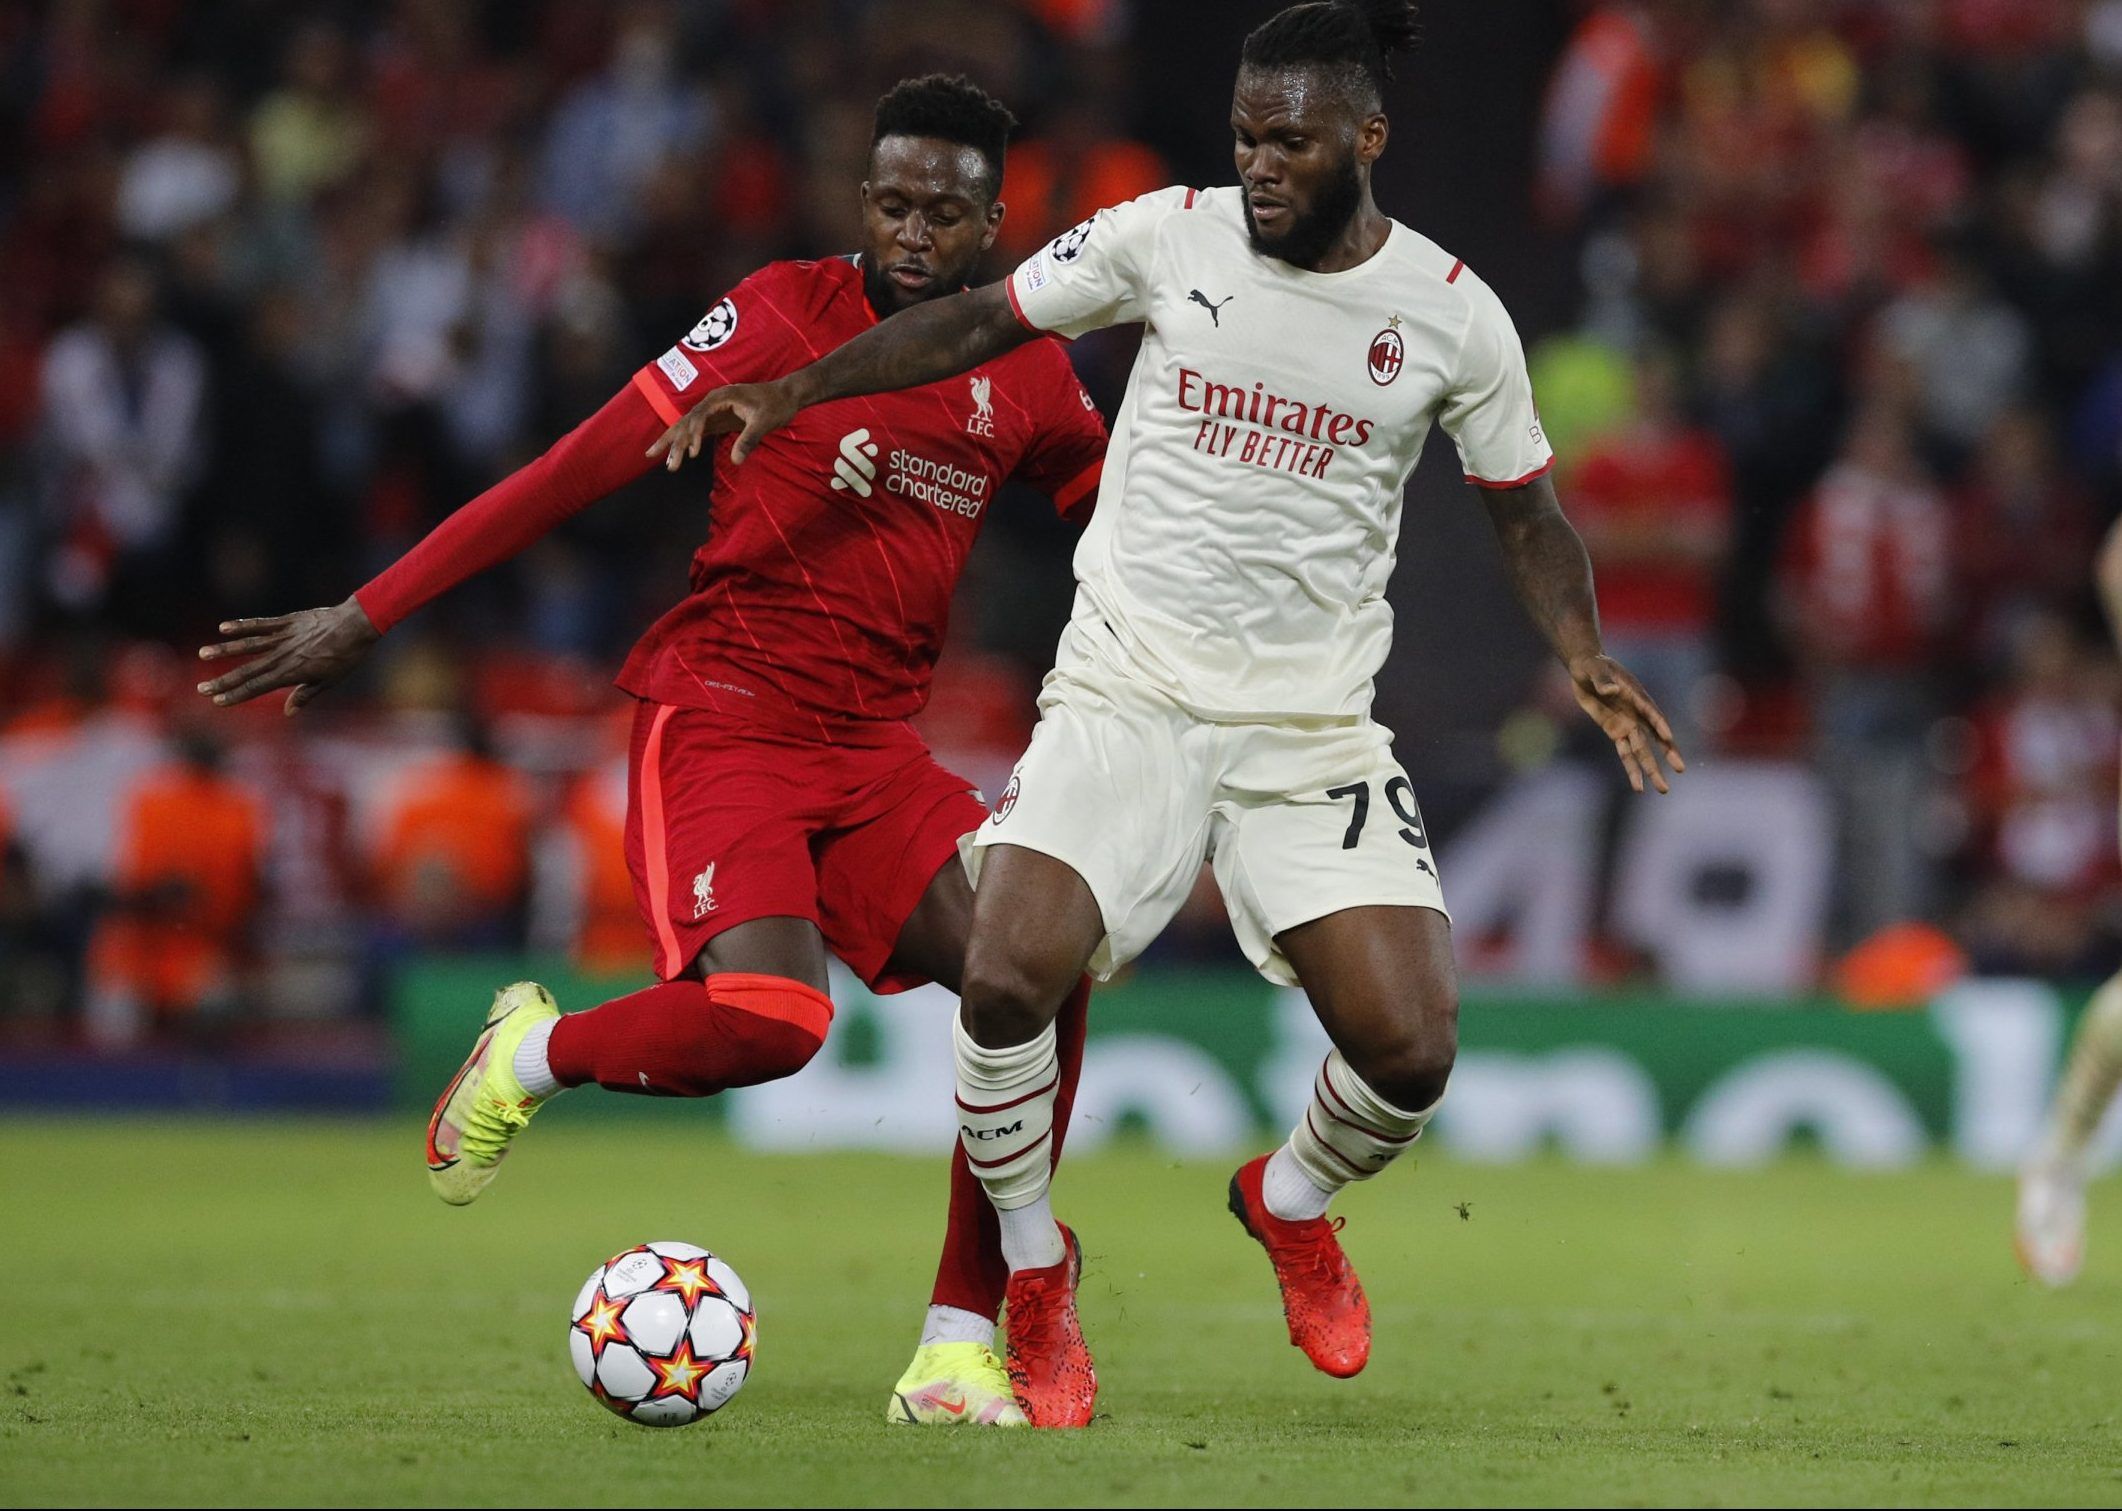 AC Milan midfielder Franck Kessie in action against Liverpool in the Champions League